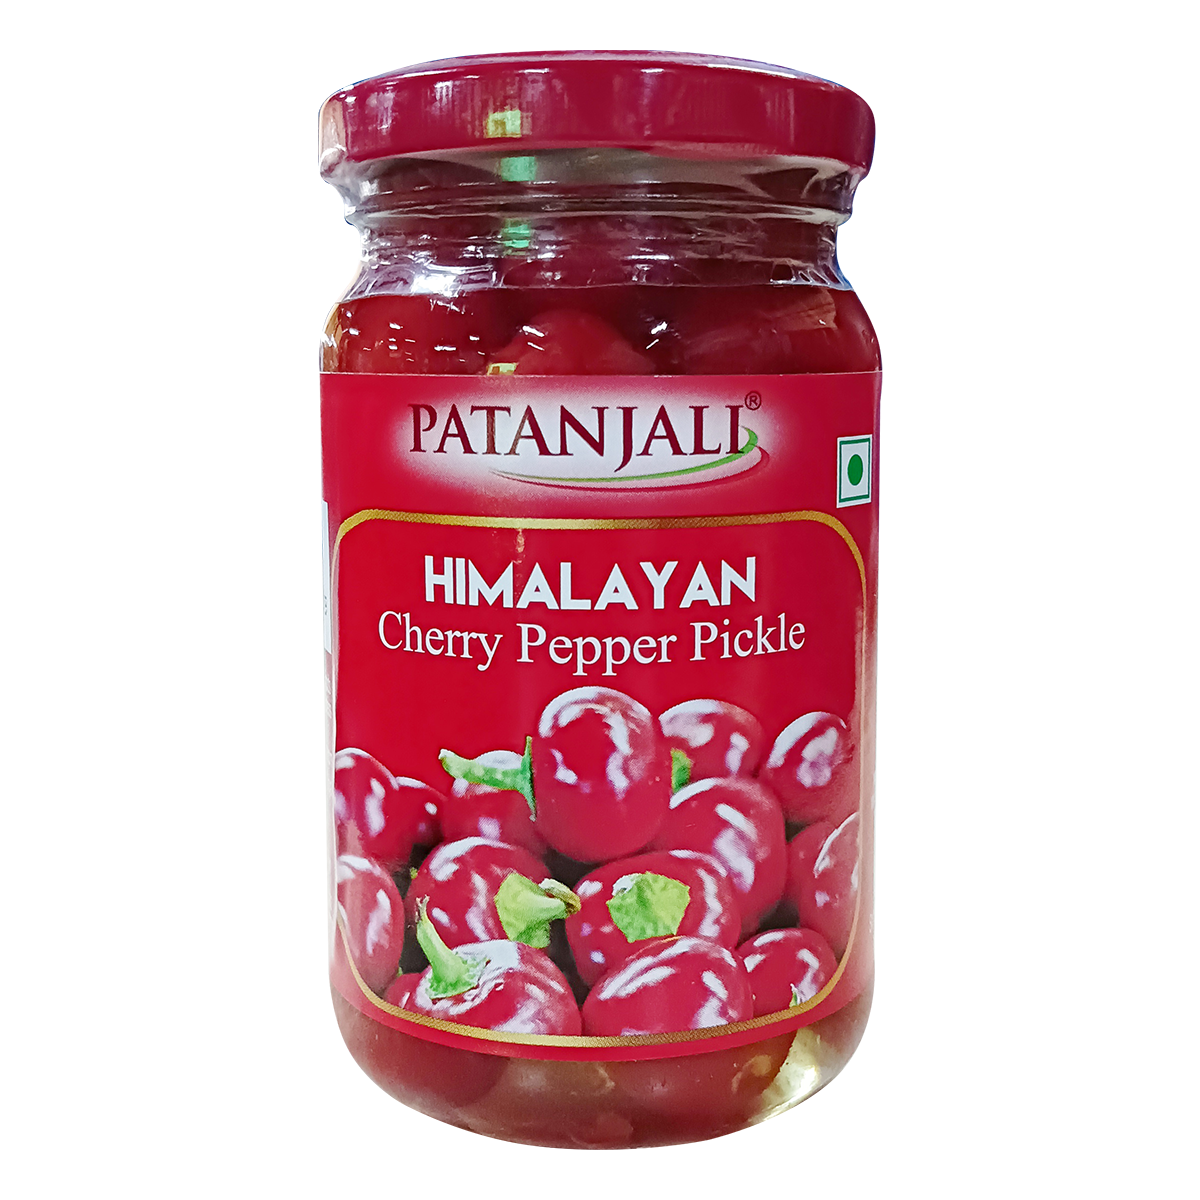 Himalayan Cherry Pepper Pickle